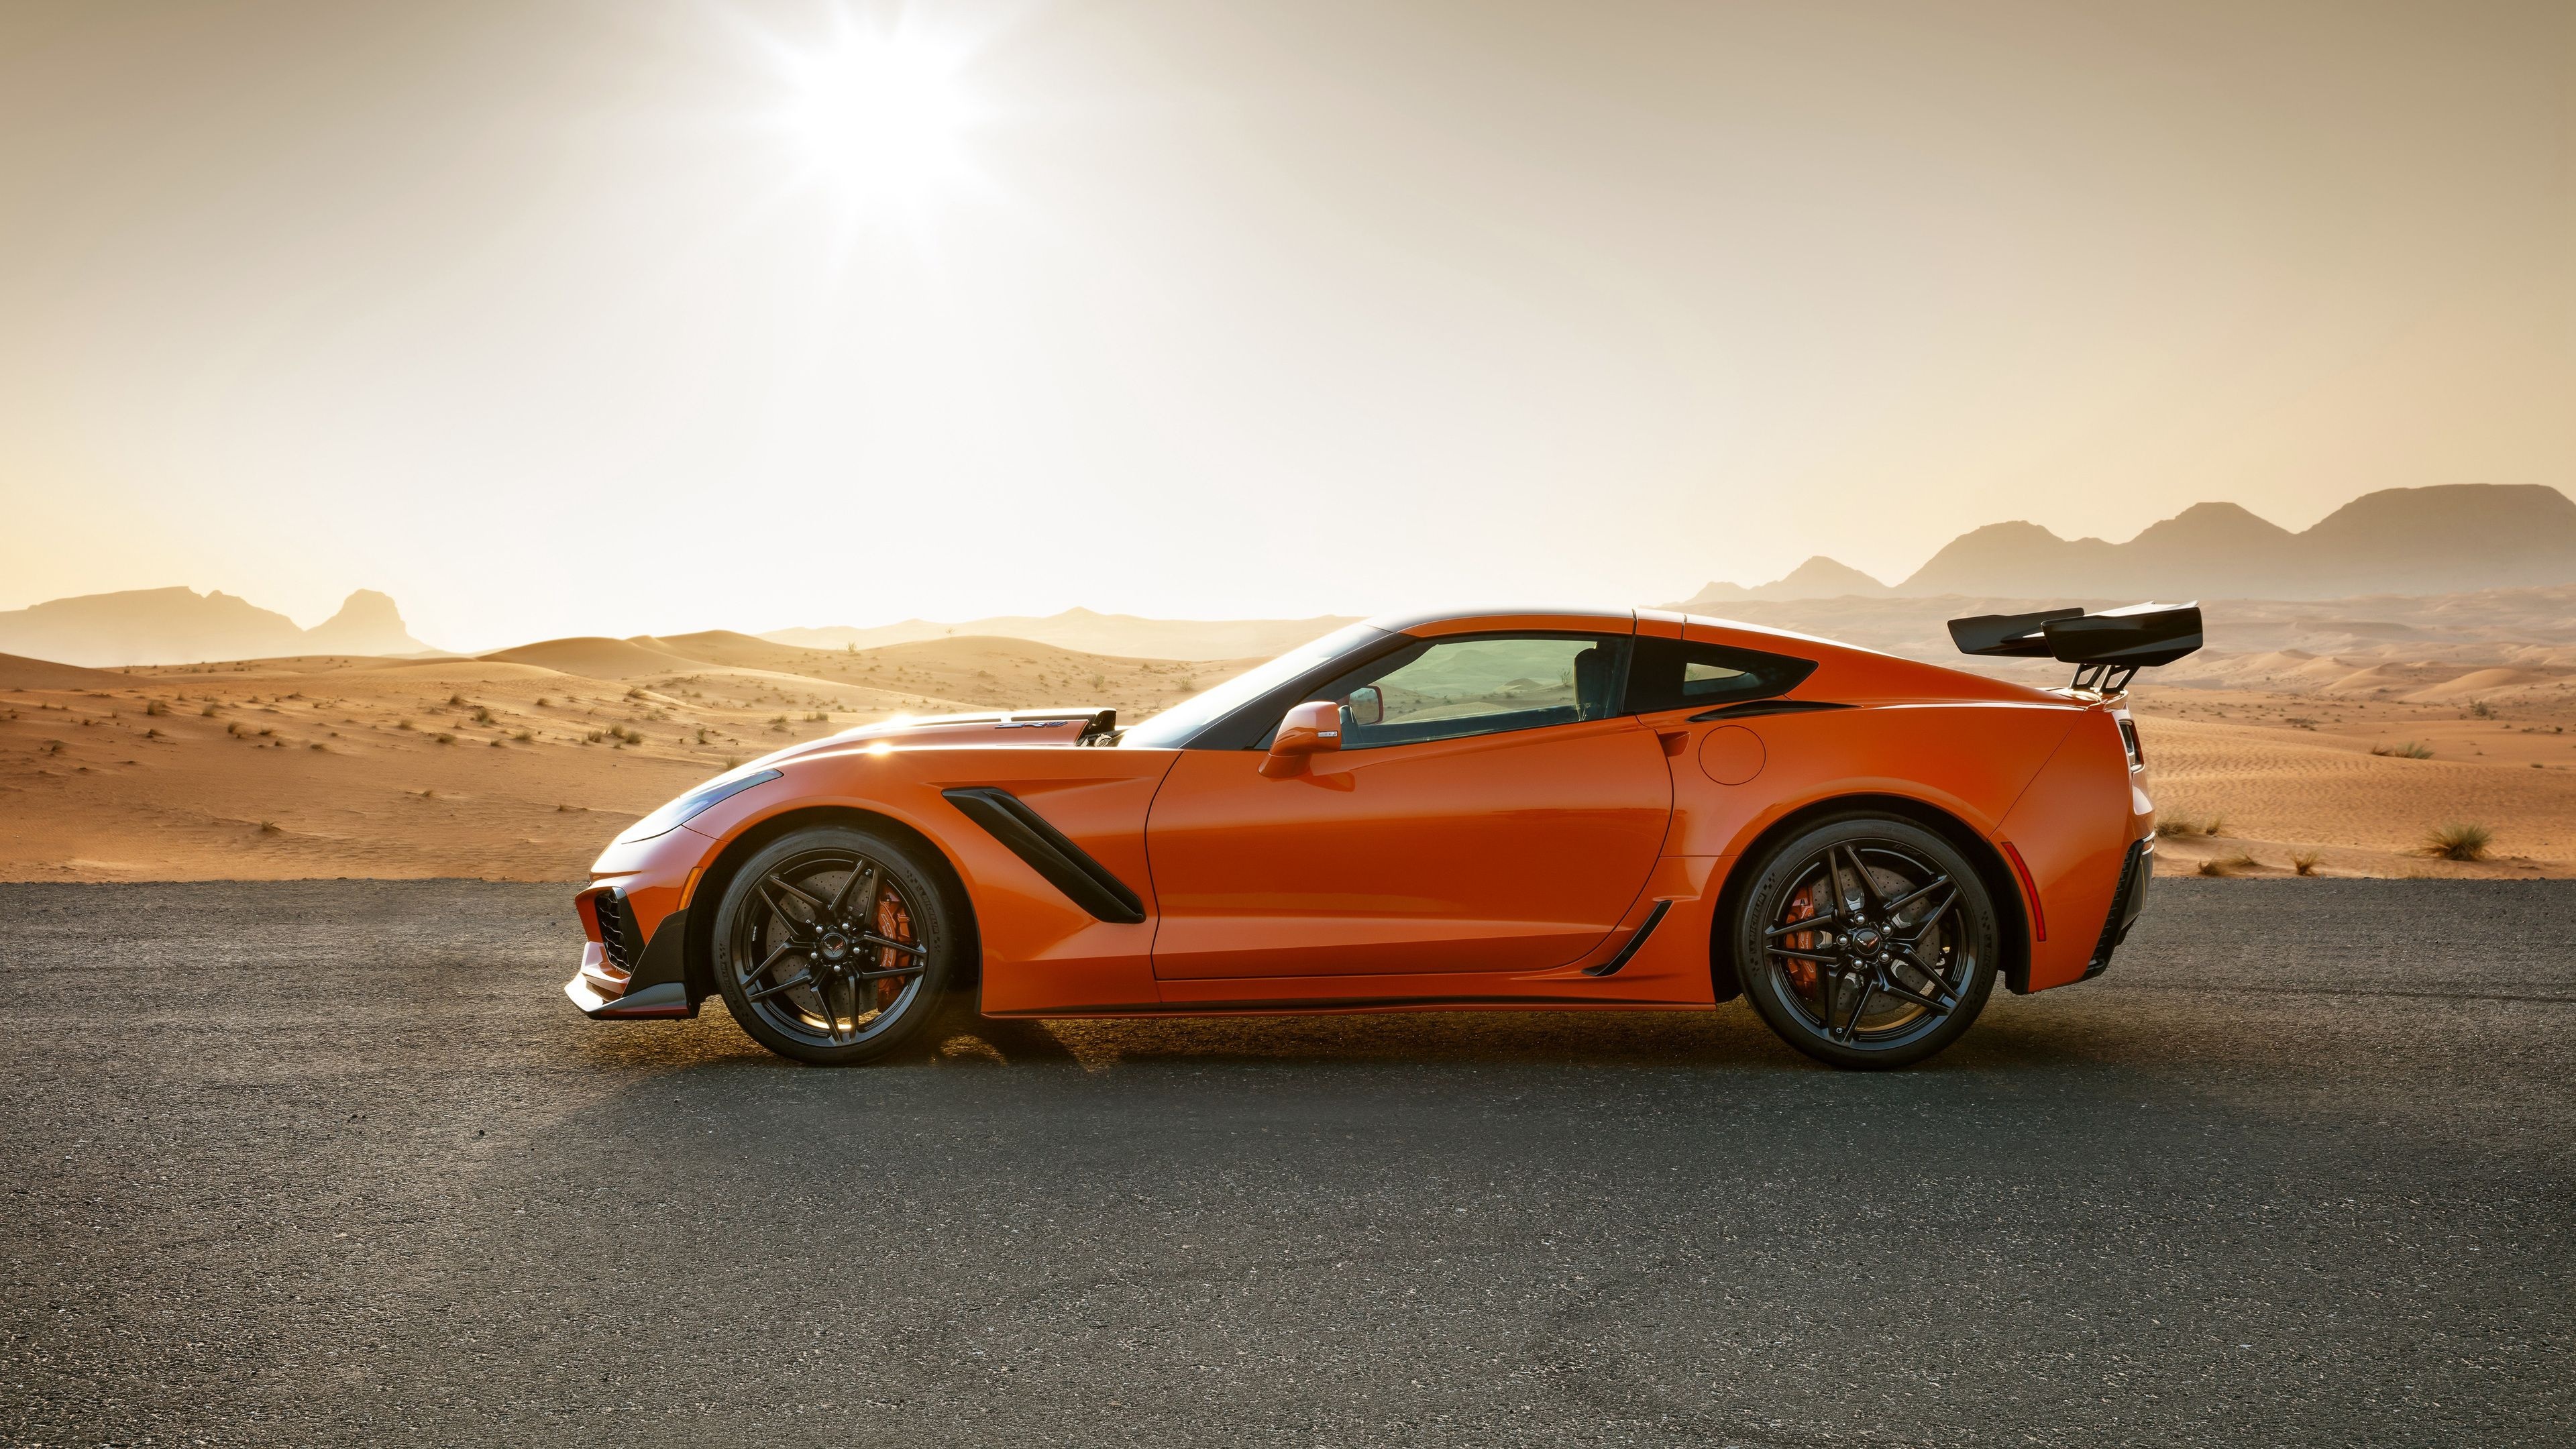 Corvette: ZR1 side view, Two-door convertible, Increased rear wing, Wider racing tires and larger brakes. 3840x2160 4K Wallpaper.